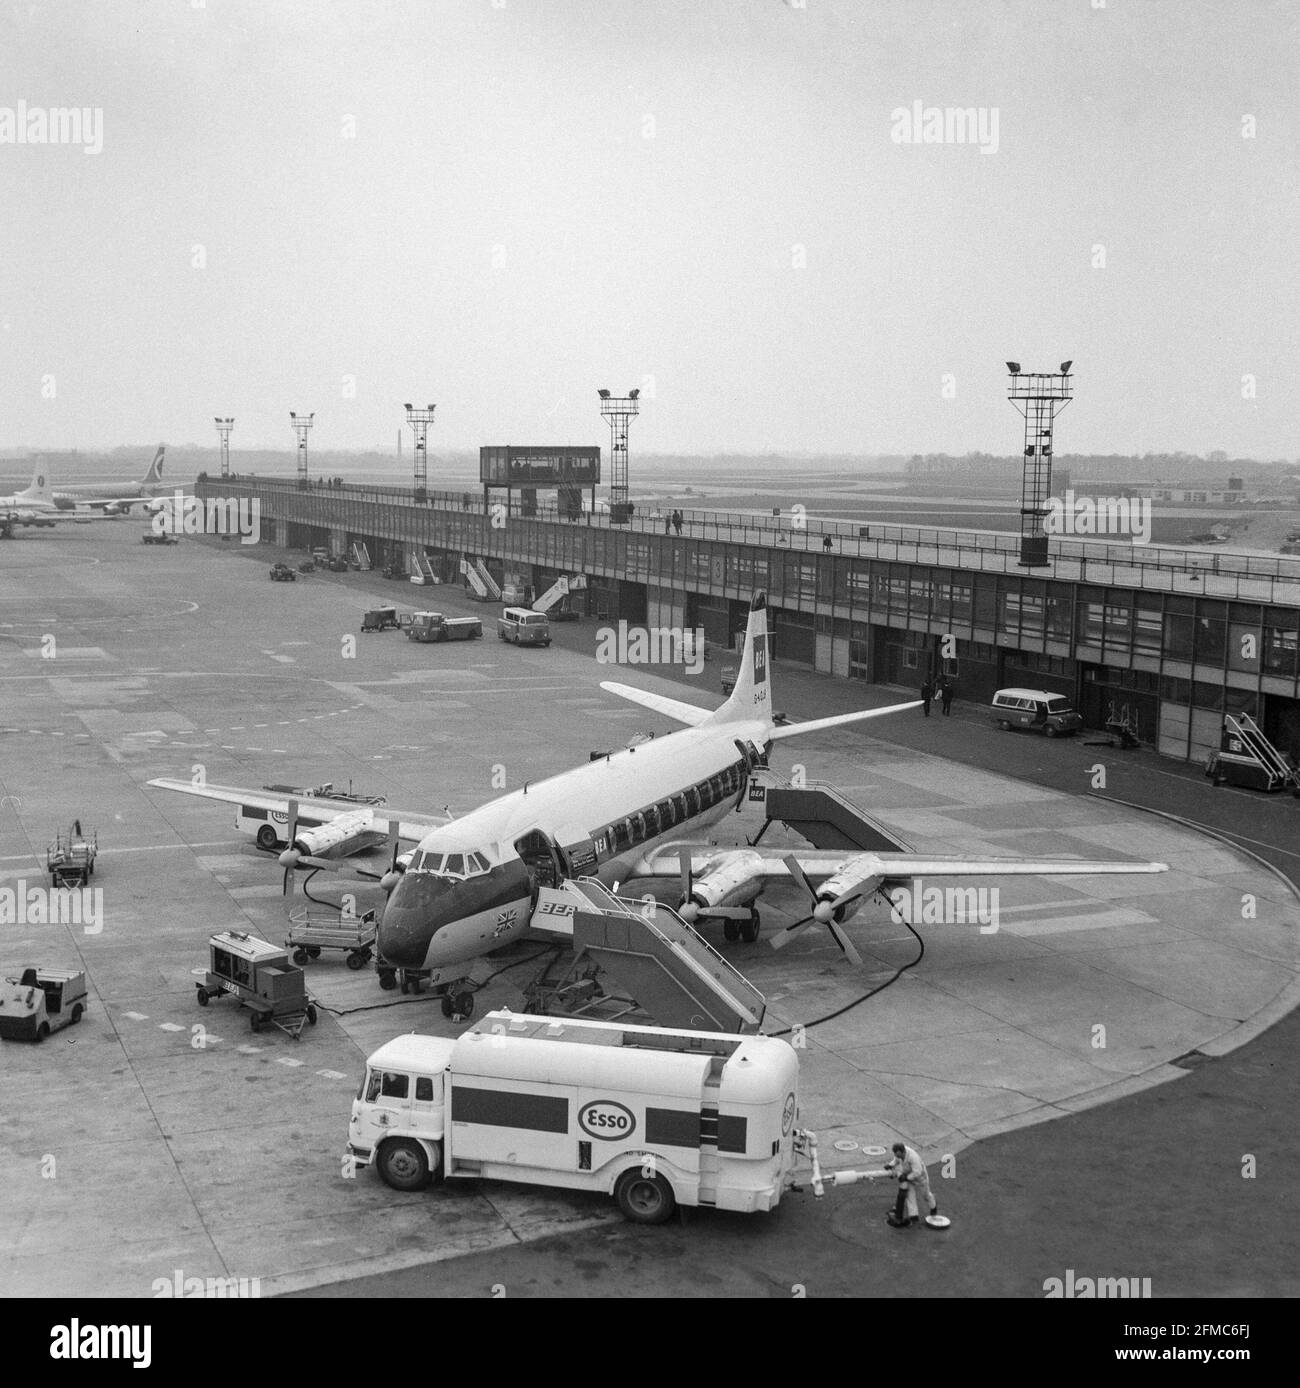 Vintage black and white photograph taken at Manchester Ringway Airport in England, on 11th April 1970, showing a BEA, British European Airways, Vickers Viscount airliner, registration G-AOJB. The aircraft is being refuelled by an Esso fuel tanker. Stock Photo